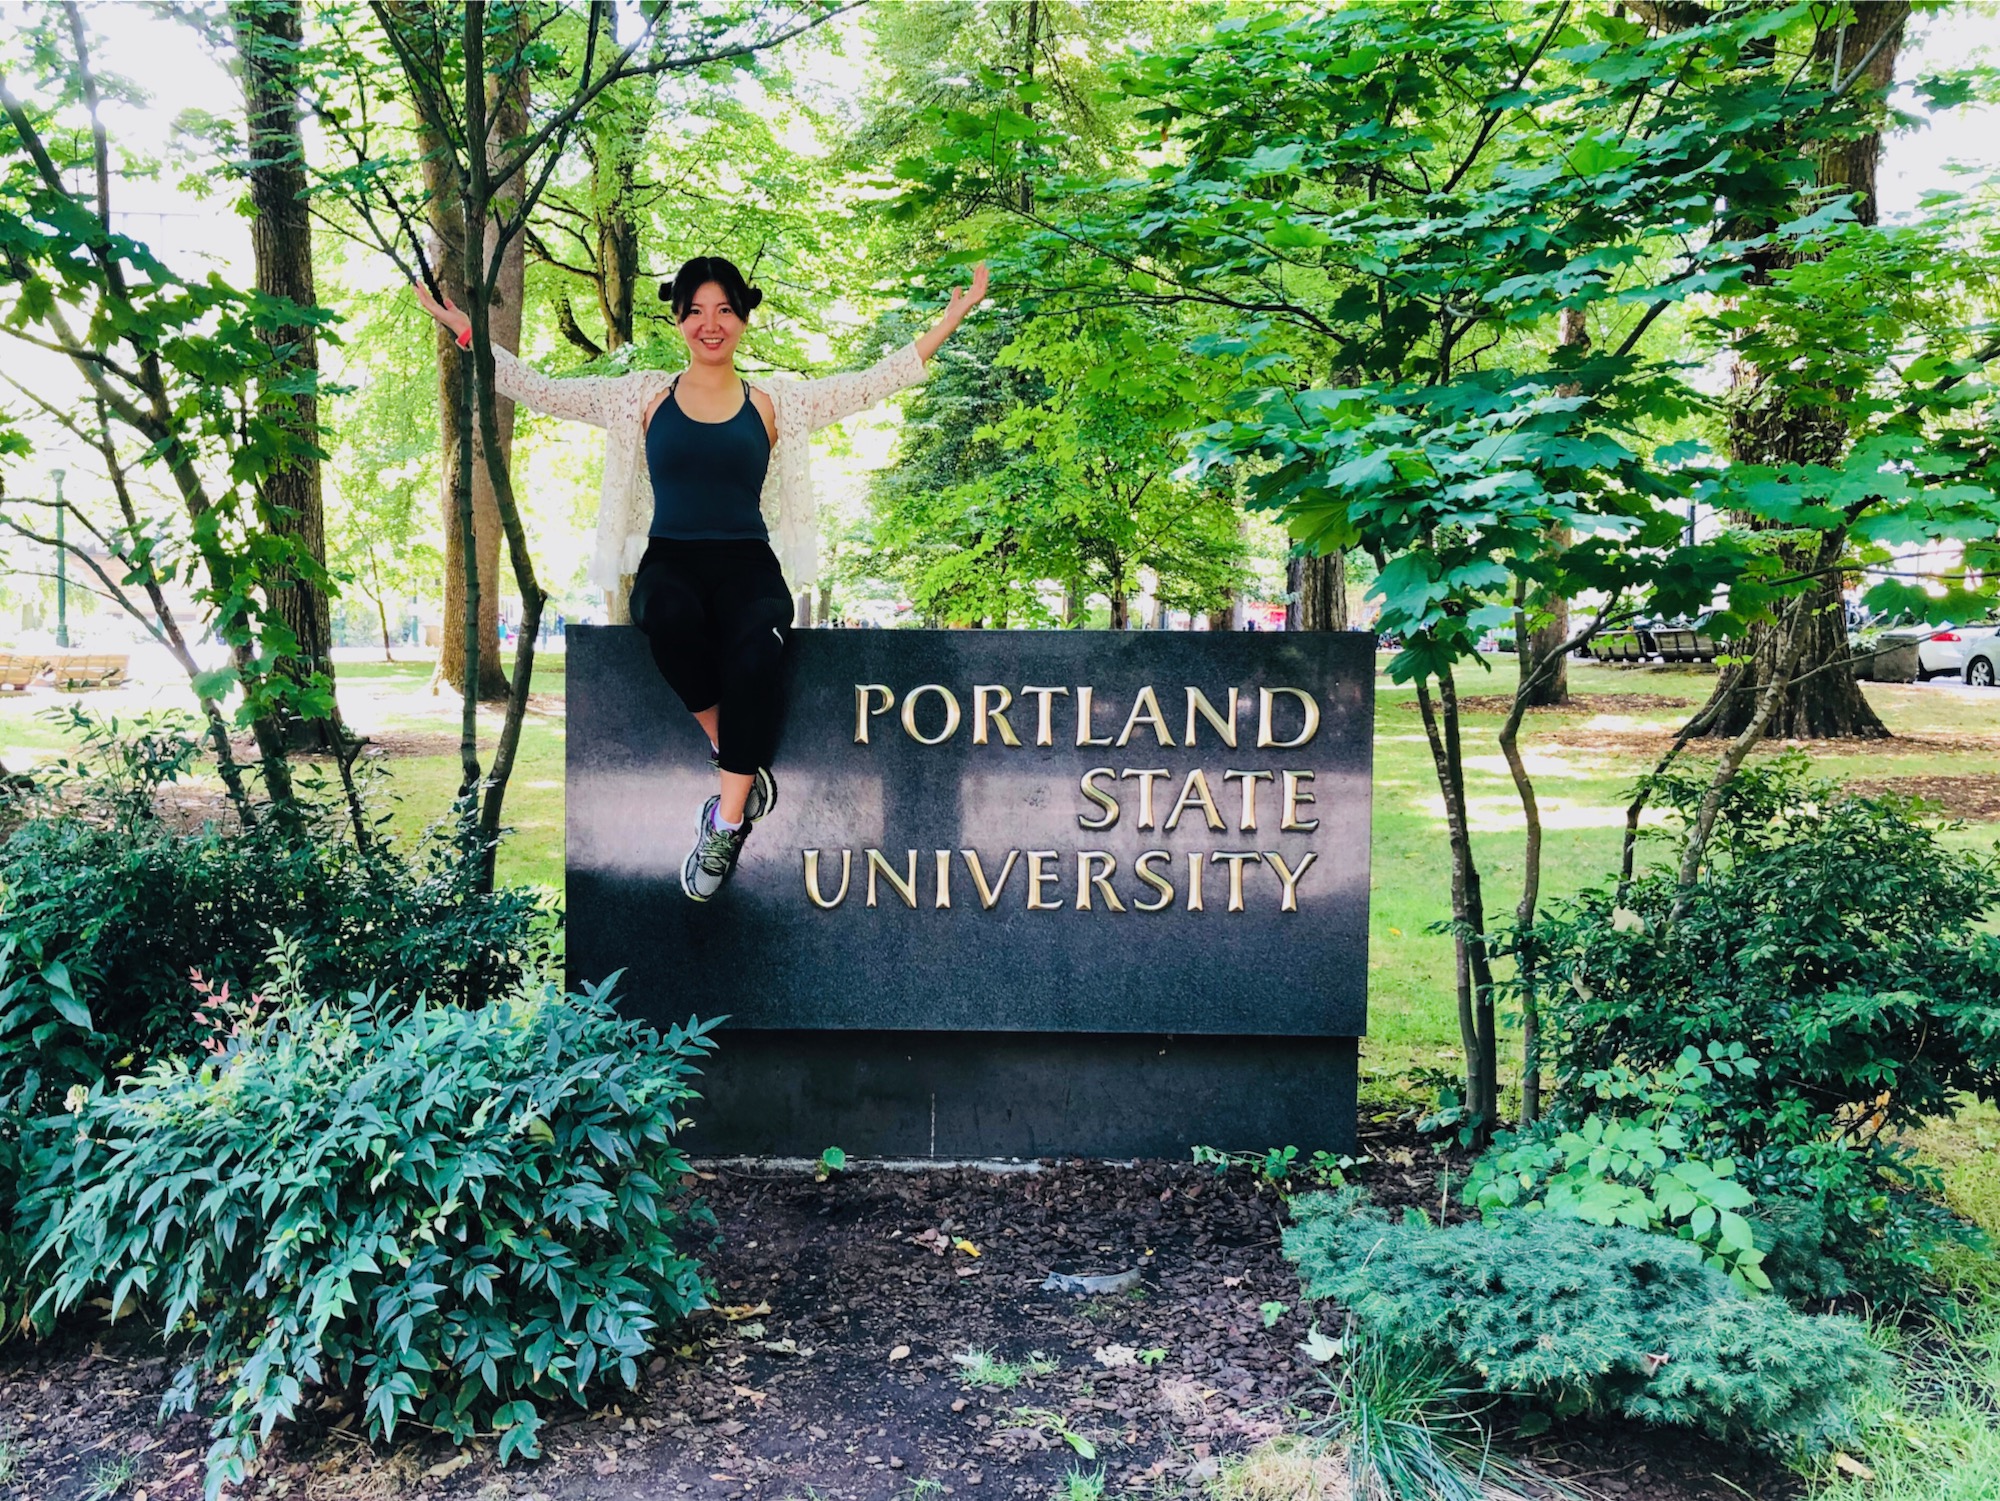 The image is of a person sitting on the Portland State University sign. 